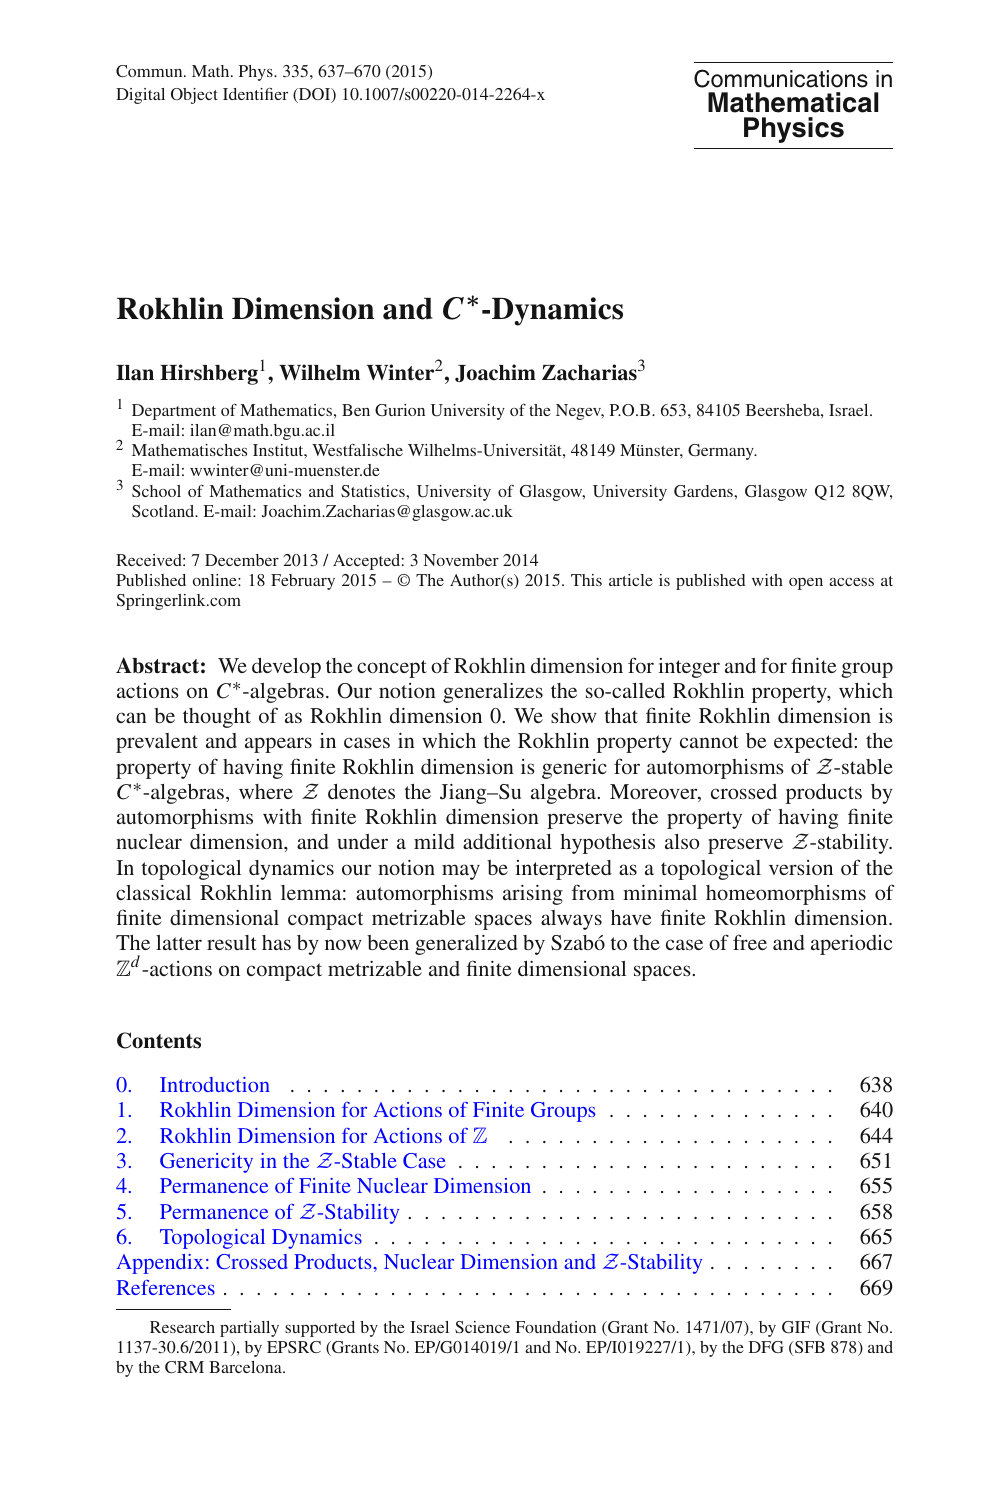 Rokhlin Dimension And C Dynamics Topic Of Research Paper In Physical Sciences Download Scholarly Article Pdf And Read For Free On Cyberleninka Open Science Hub